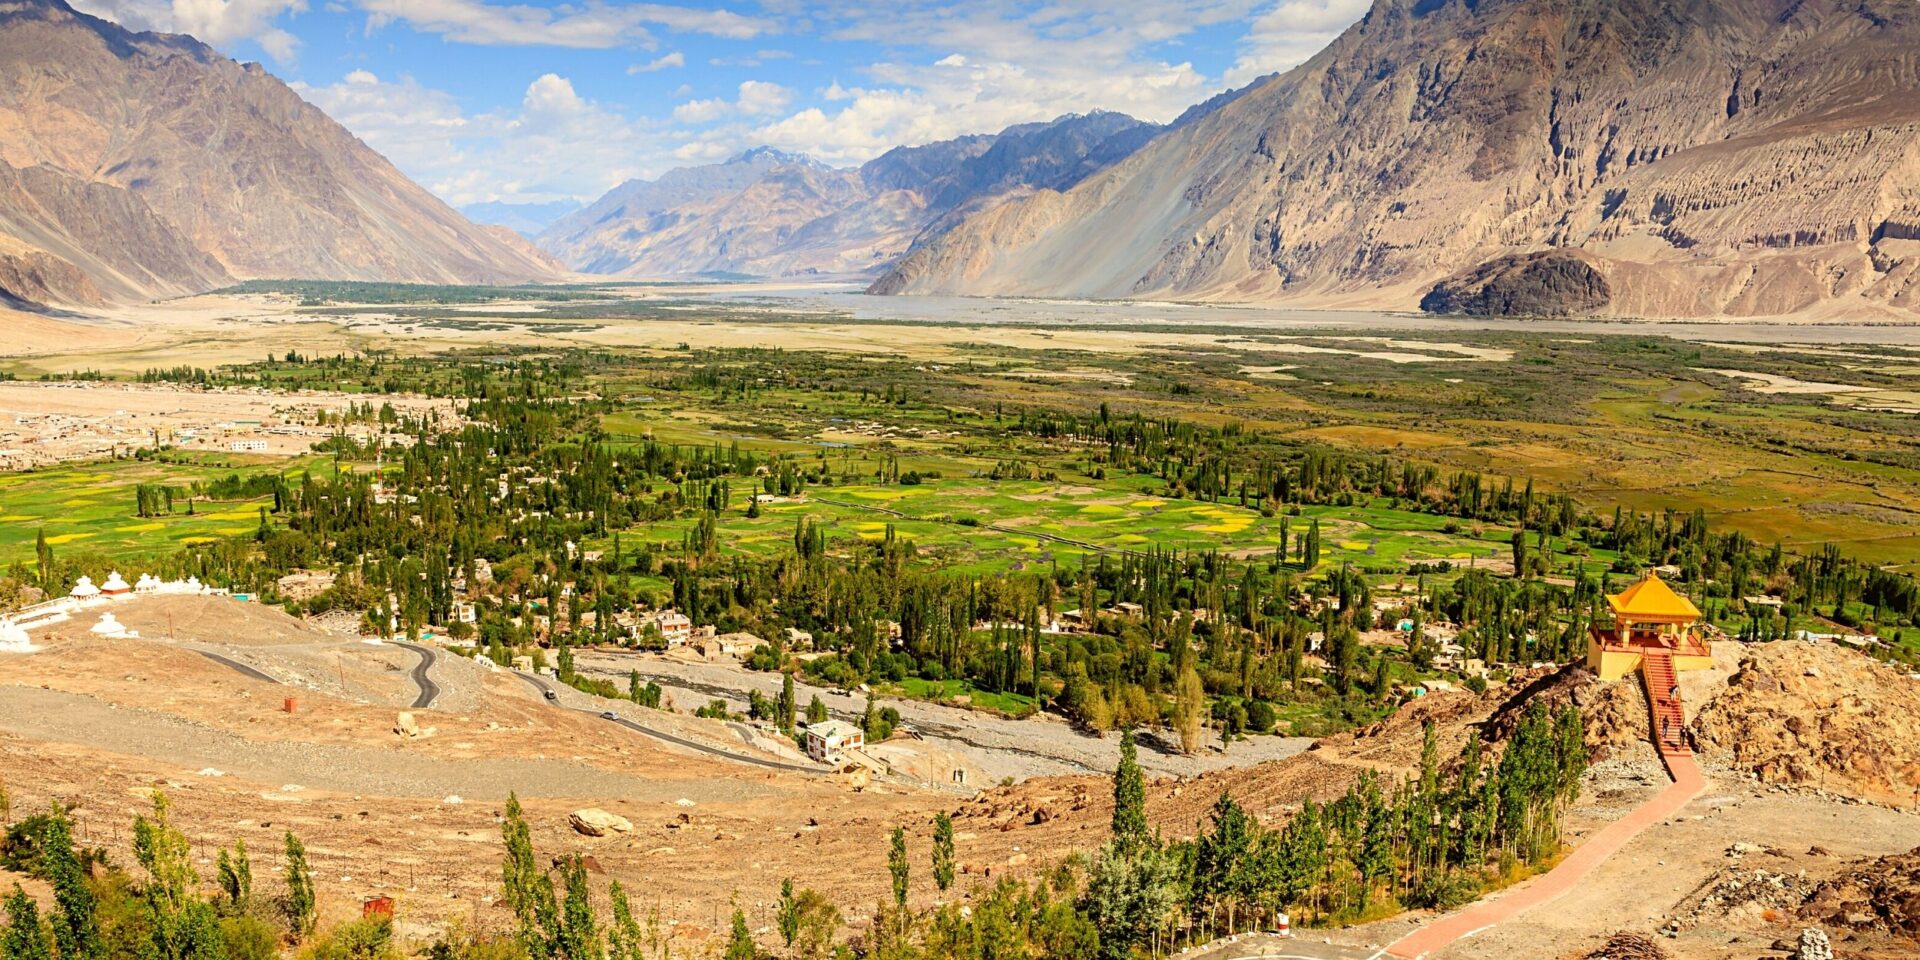 DD News on X: #WATCH  The Nubra Valley in Leh, Ladakh is one of the most  revered valleys in India. The Valley is famous for its enchanting views and  the famous